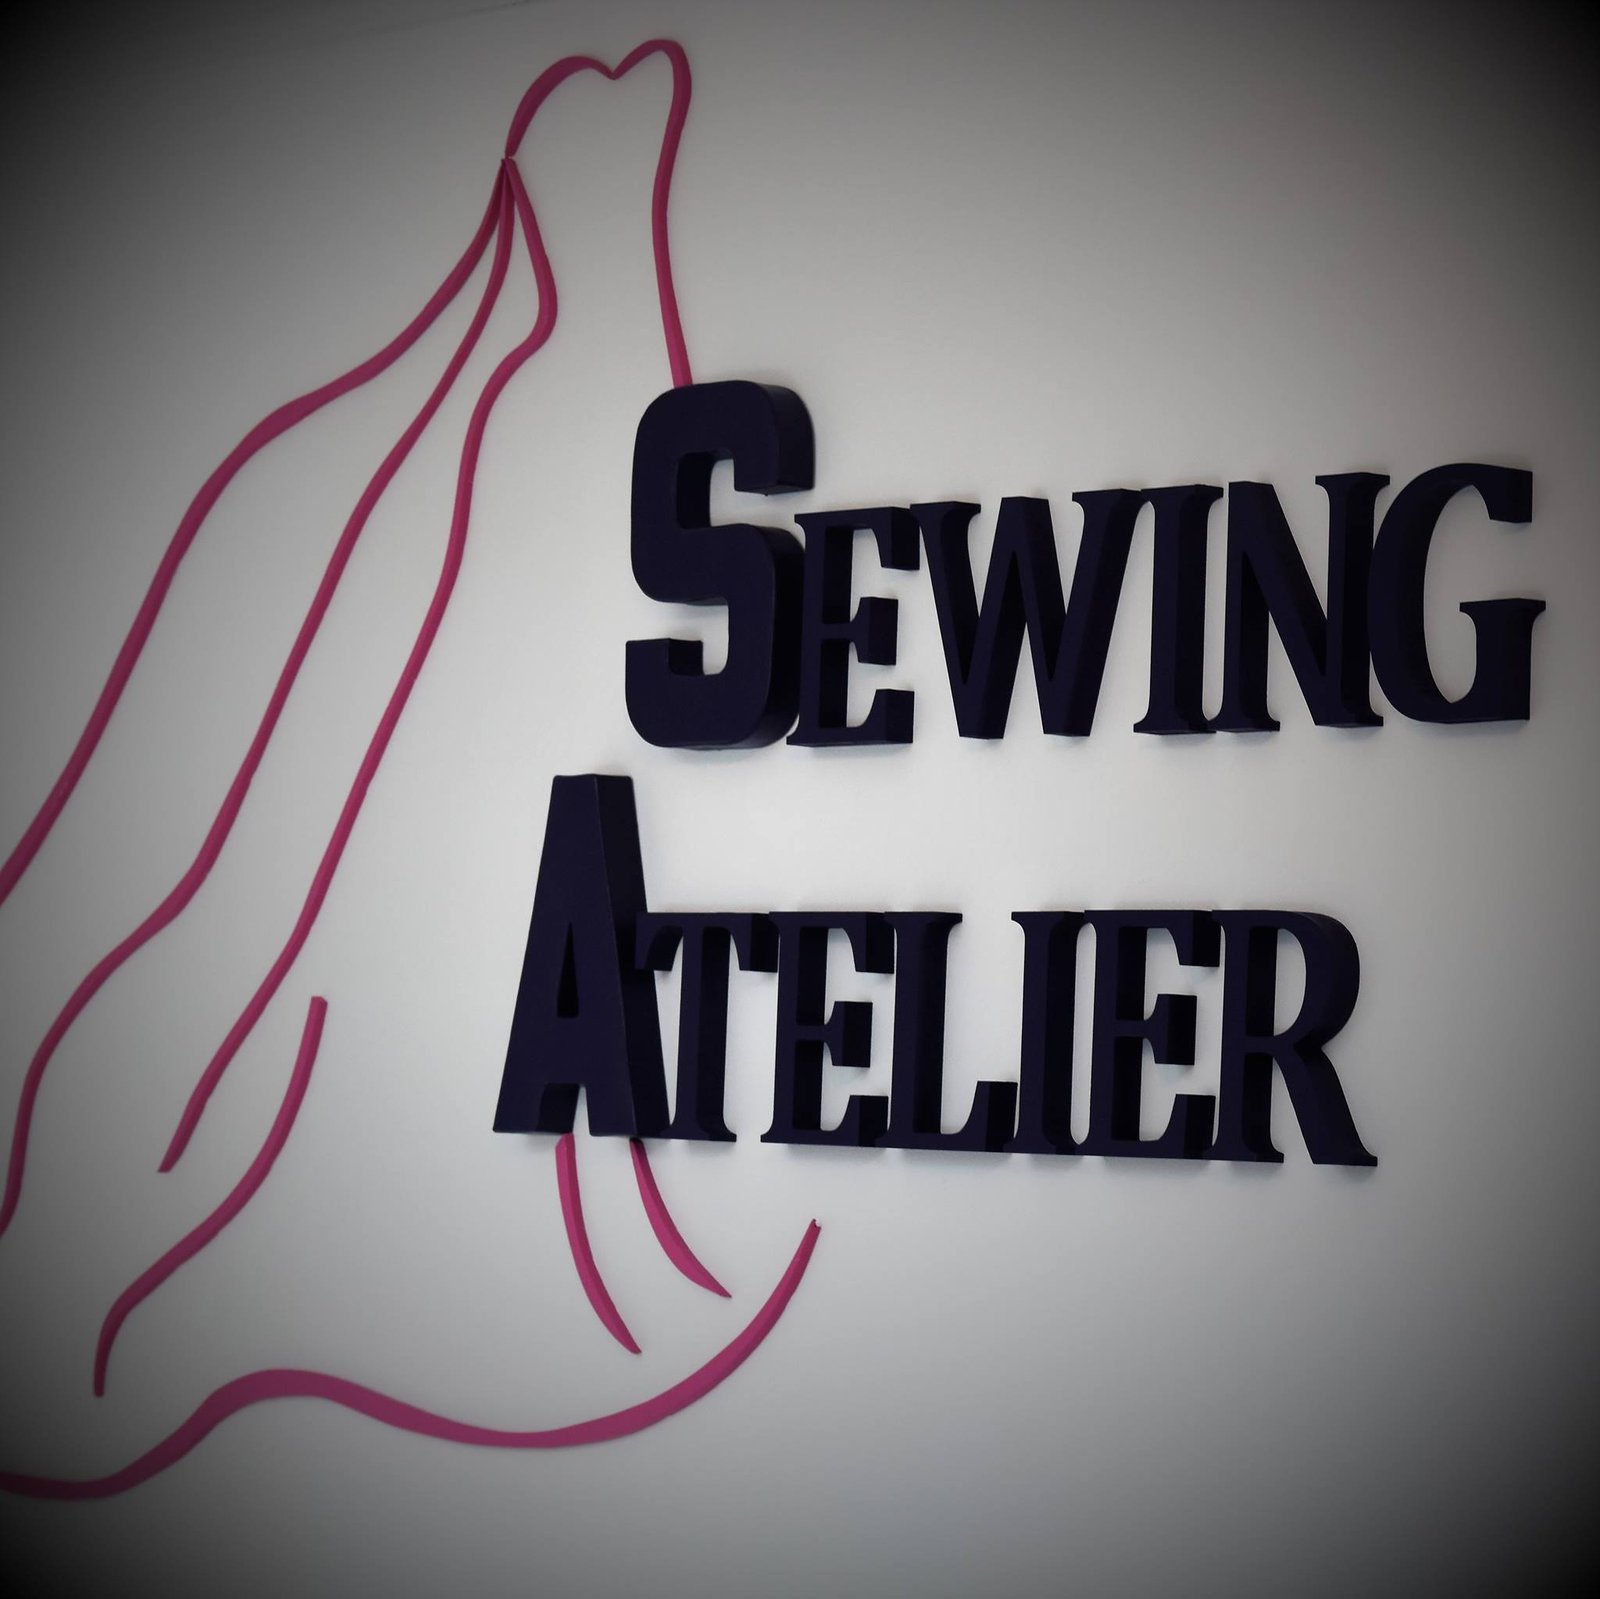 Sewing Atelier